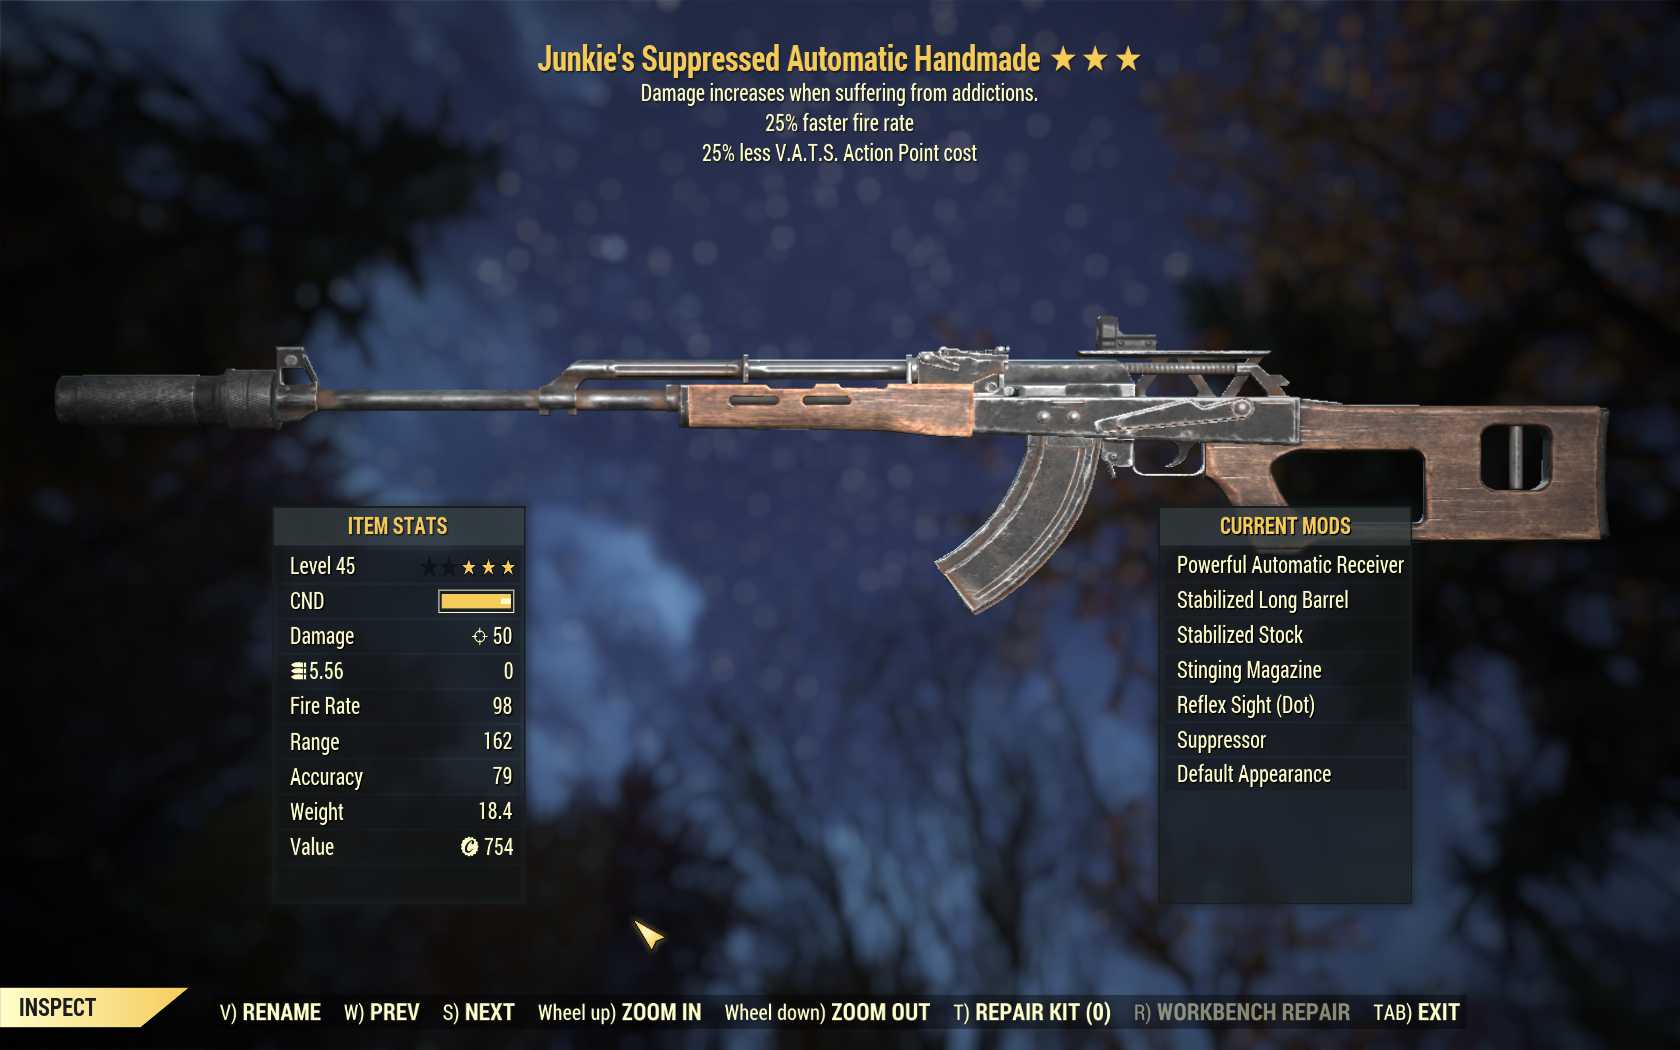 Junkie's Handmade (25% faster fire rate, 25% less VATS AP cost)